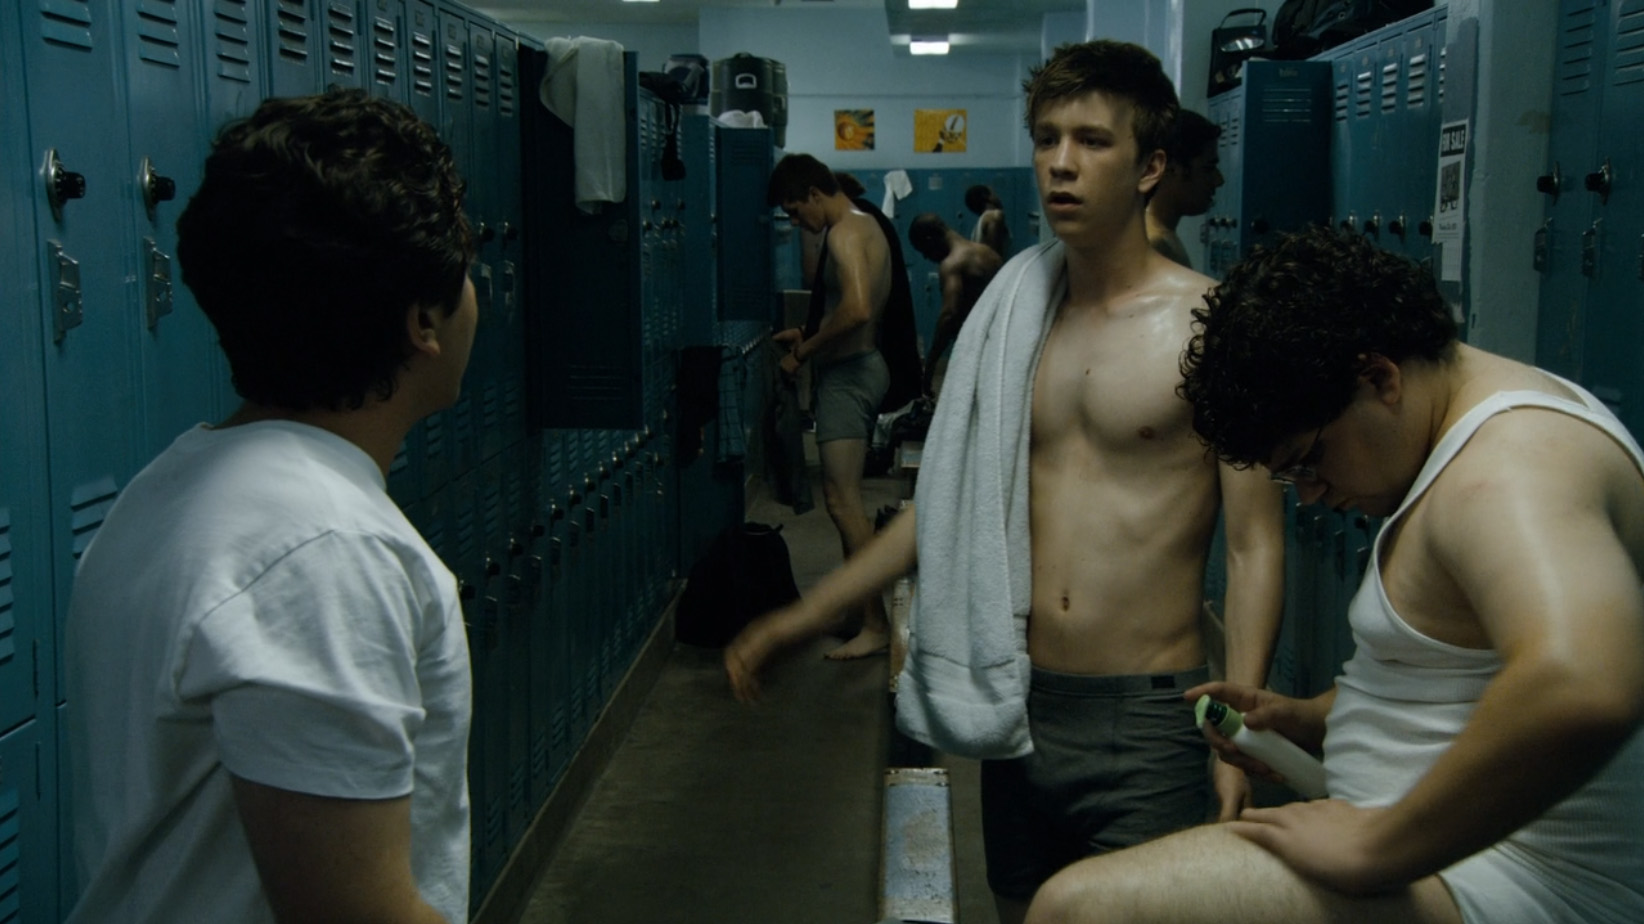 Thomas Mann in Project X - Picture 1 of 4. Thomas Mann in Project X. 